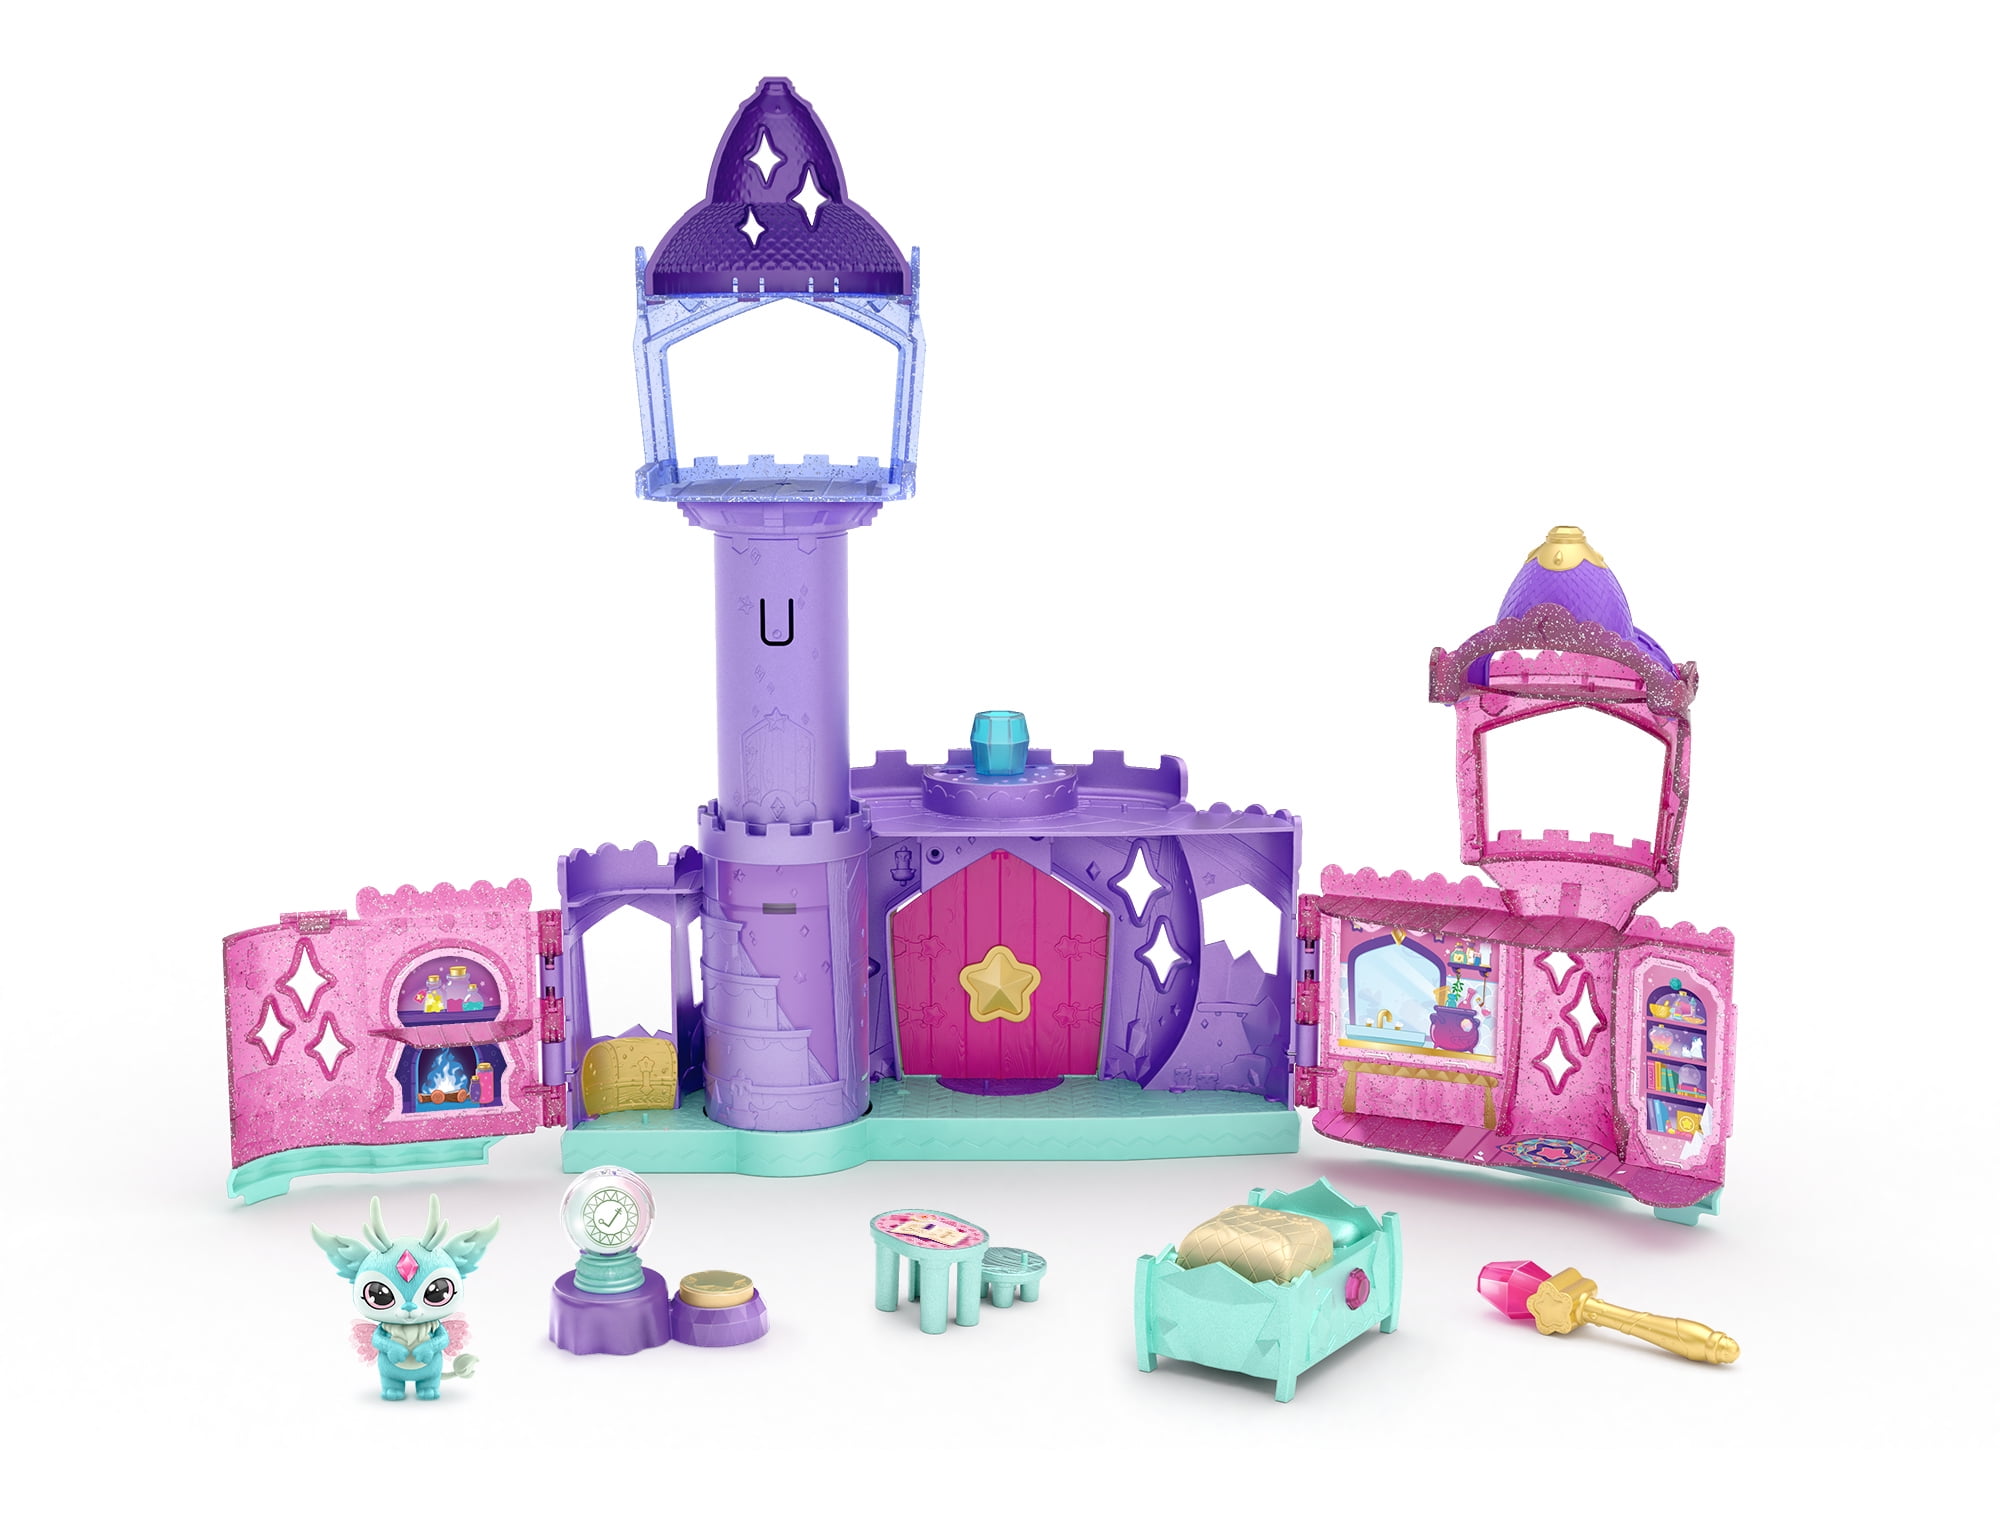 Magic Mixies, Mixlings Magic Castle Playset, Expanding Playset with Magic Wand that Reveals 5 Magic Moments, Toys for Kids, Ages 5+